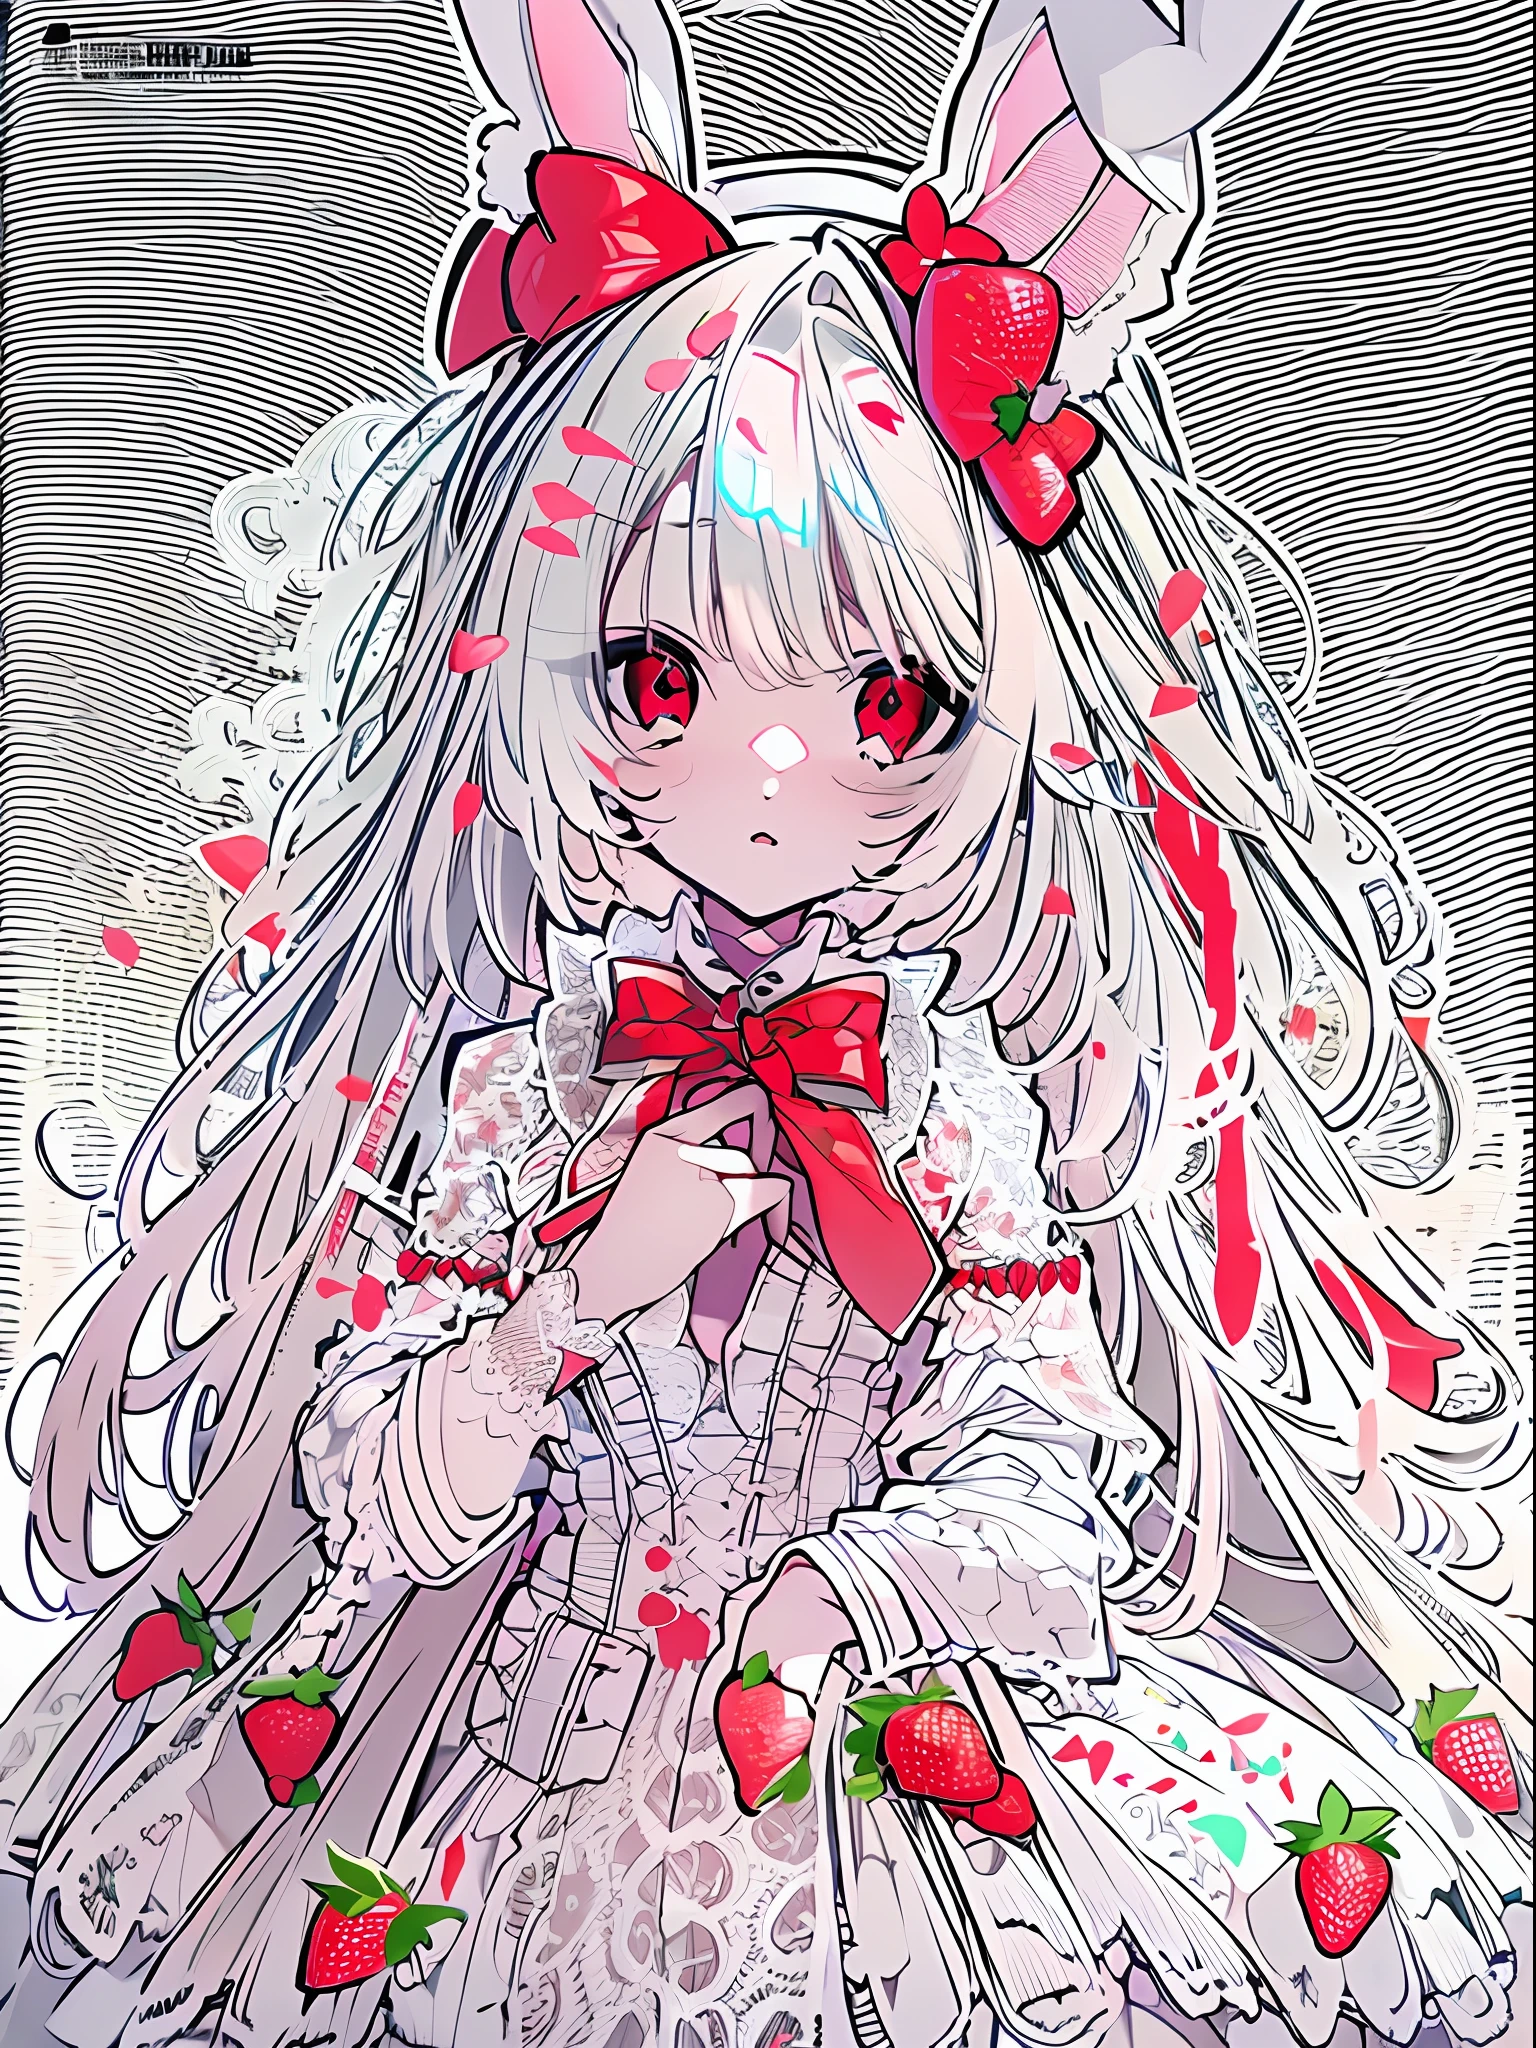 tmasterpiece，1girll，HighestQuali，Correct proportions，the detail，whaite hair，long whitr hair,White hair，Translucent red eyes，White lace headdress，Lace headdress，white headgear，Red bow，Rabbit ears，rabbitears，Strawberry side dishes，Sat down，White dress，red decoration，Lace，white legwear，Little red leather shoes，morango，bunny tail，fundo vermelho